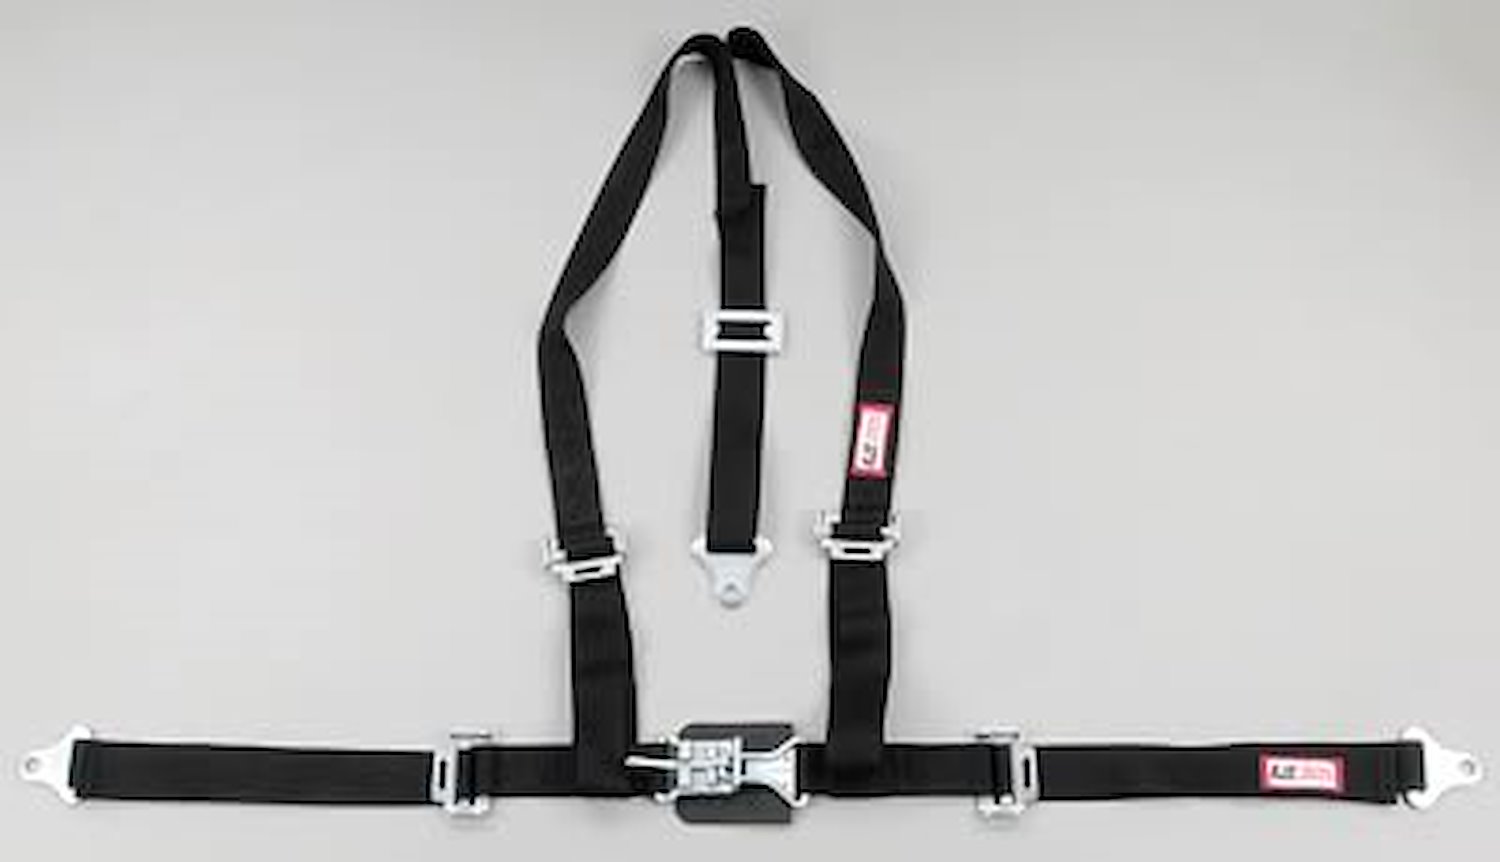 NON-SFI L&L HARNESS 2 PULL UP Lap Belt SEWN IN 2 S.H. V ROLL BAR Mount w/STERNUM STRAP ALL BOLT ENDS BLUE